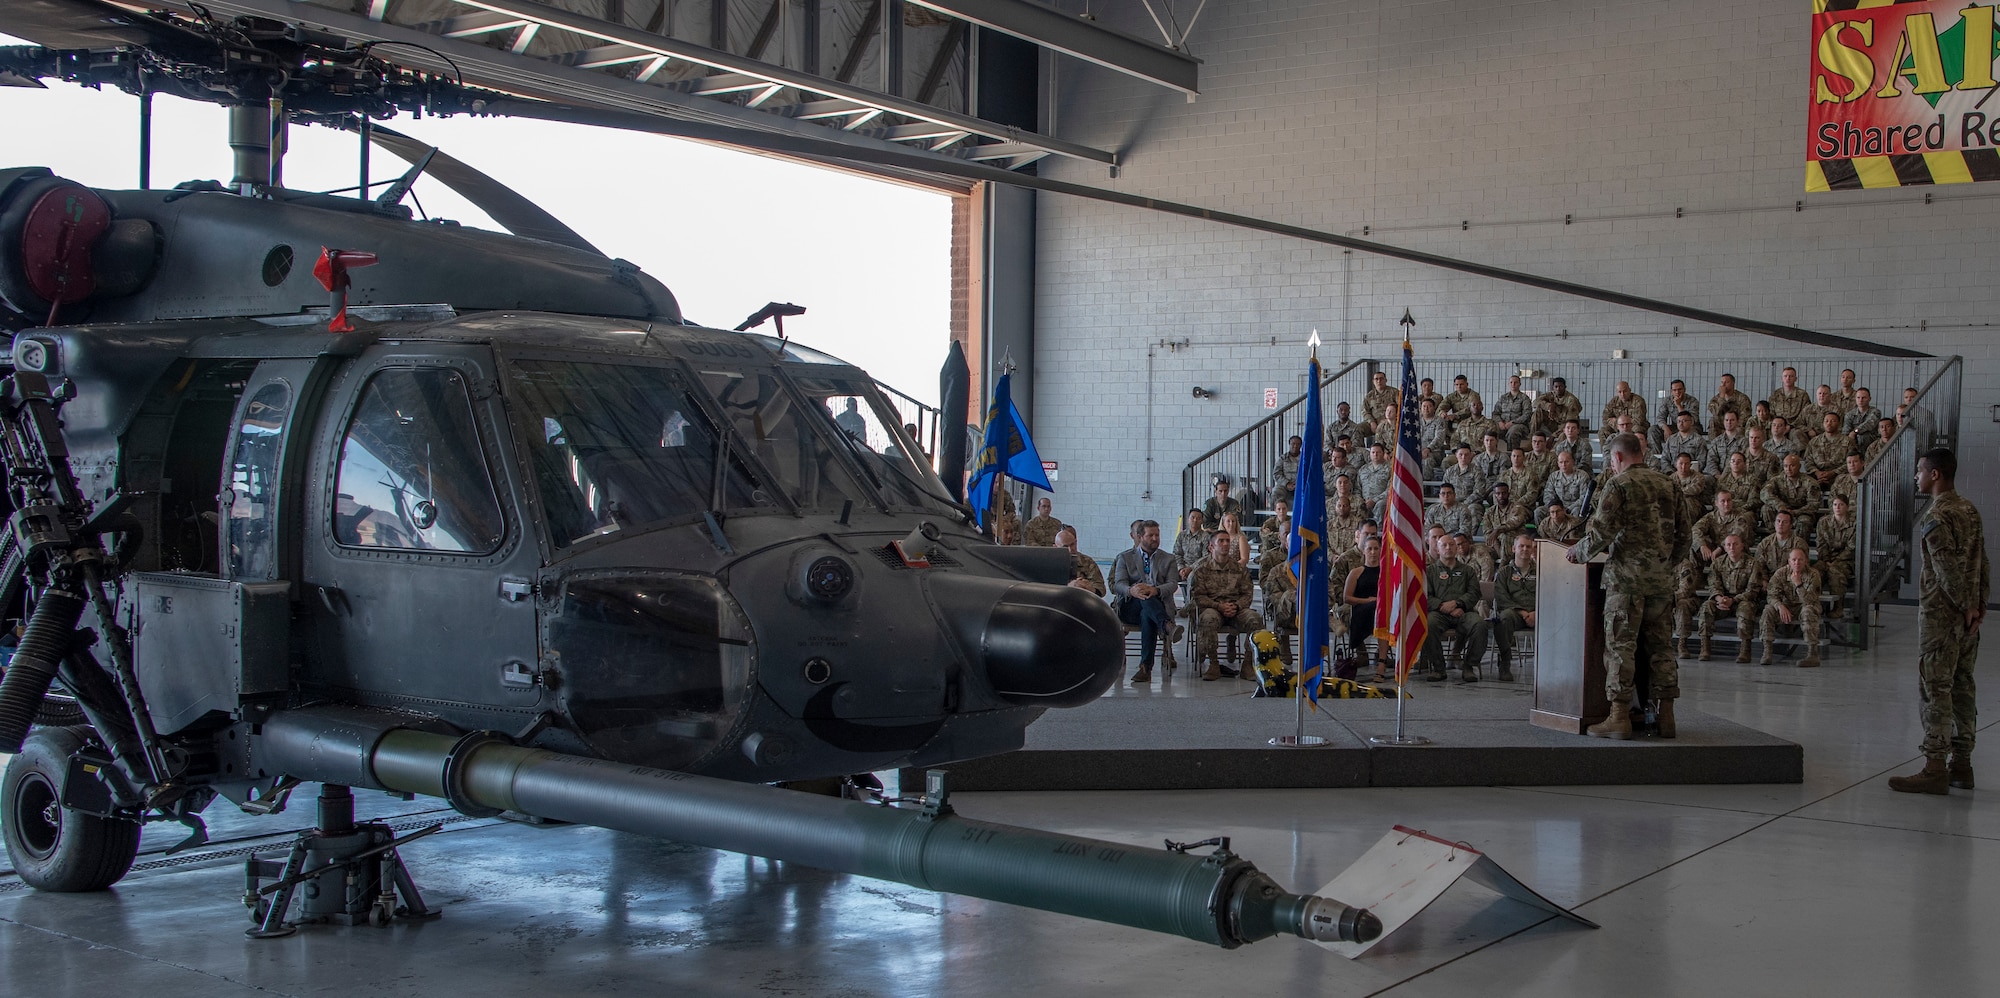 A crowd sits behind a helicopter during a ceremony.